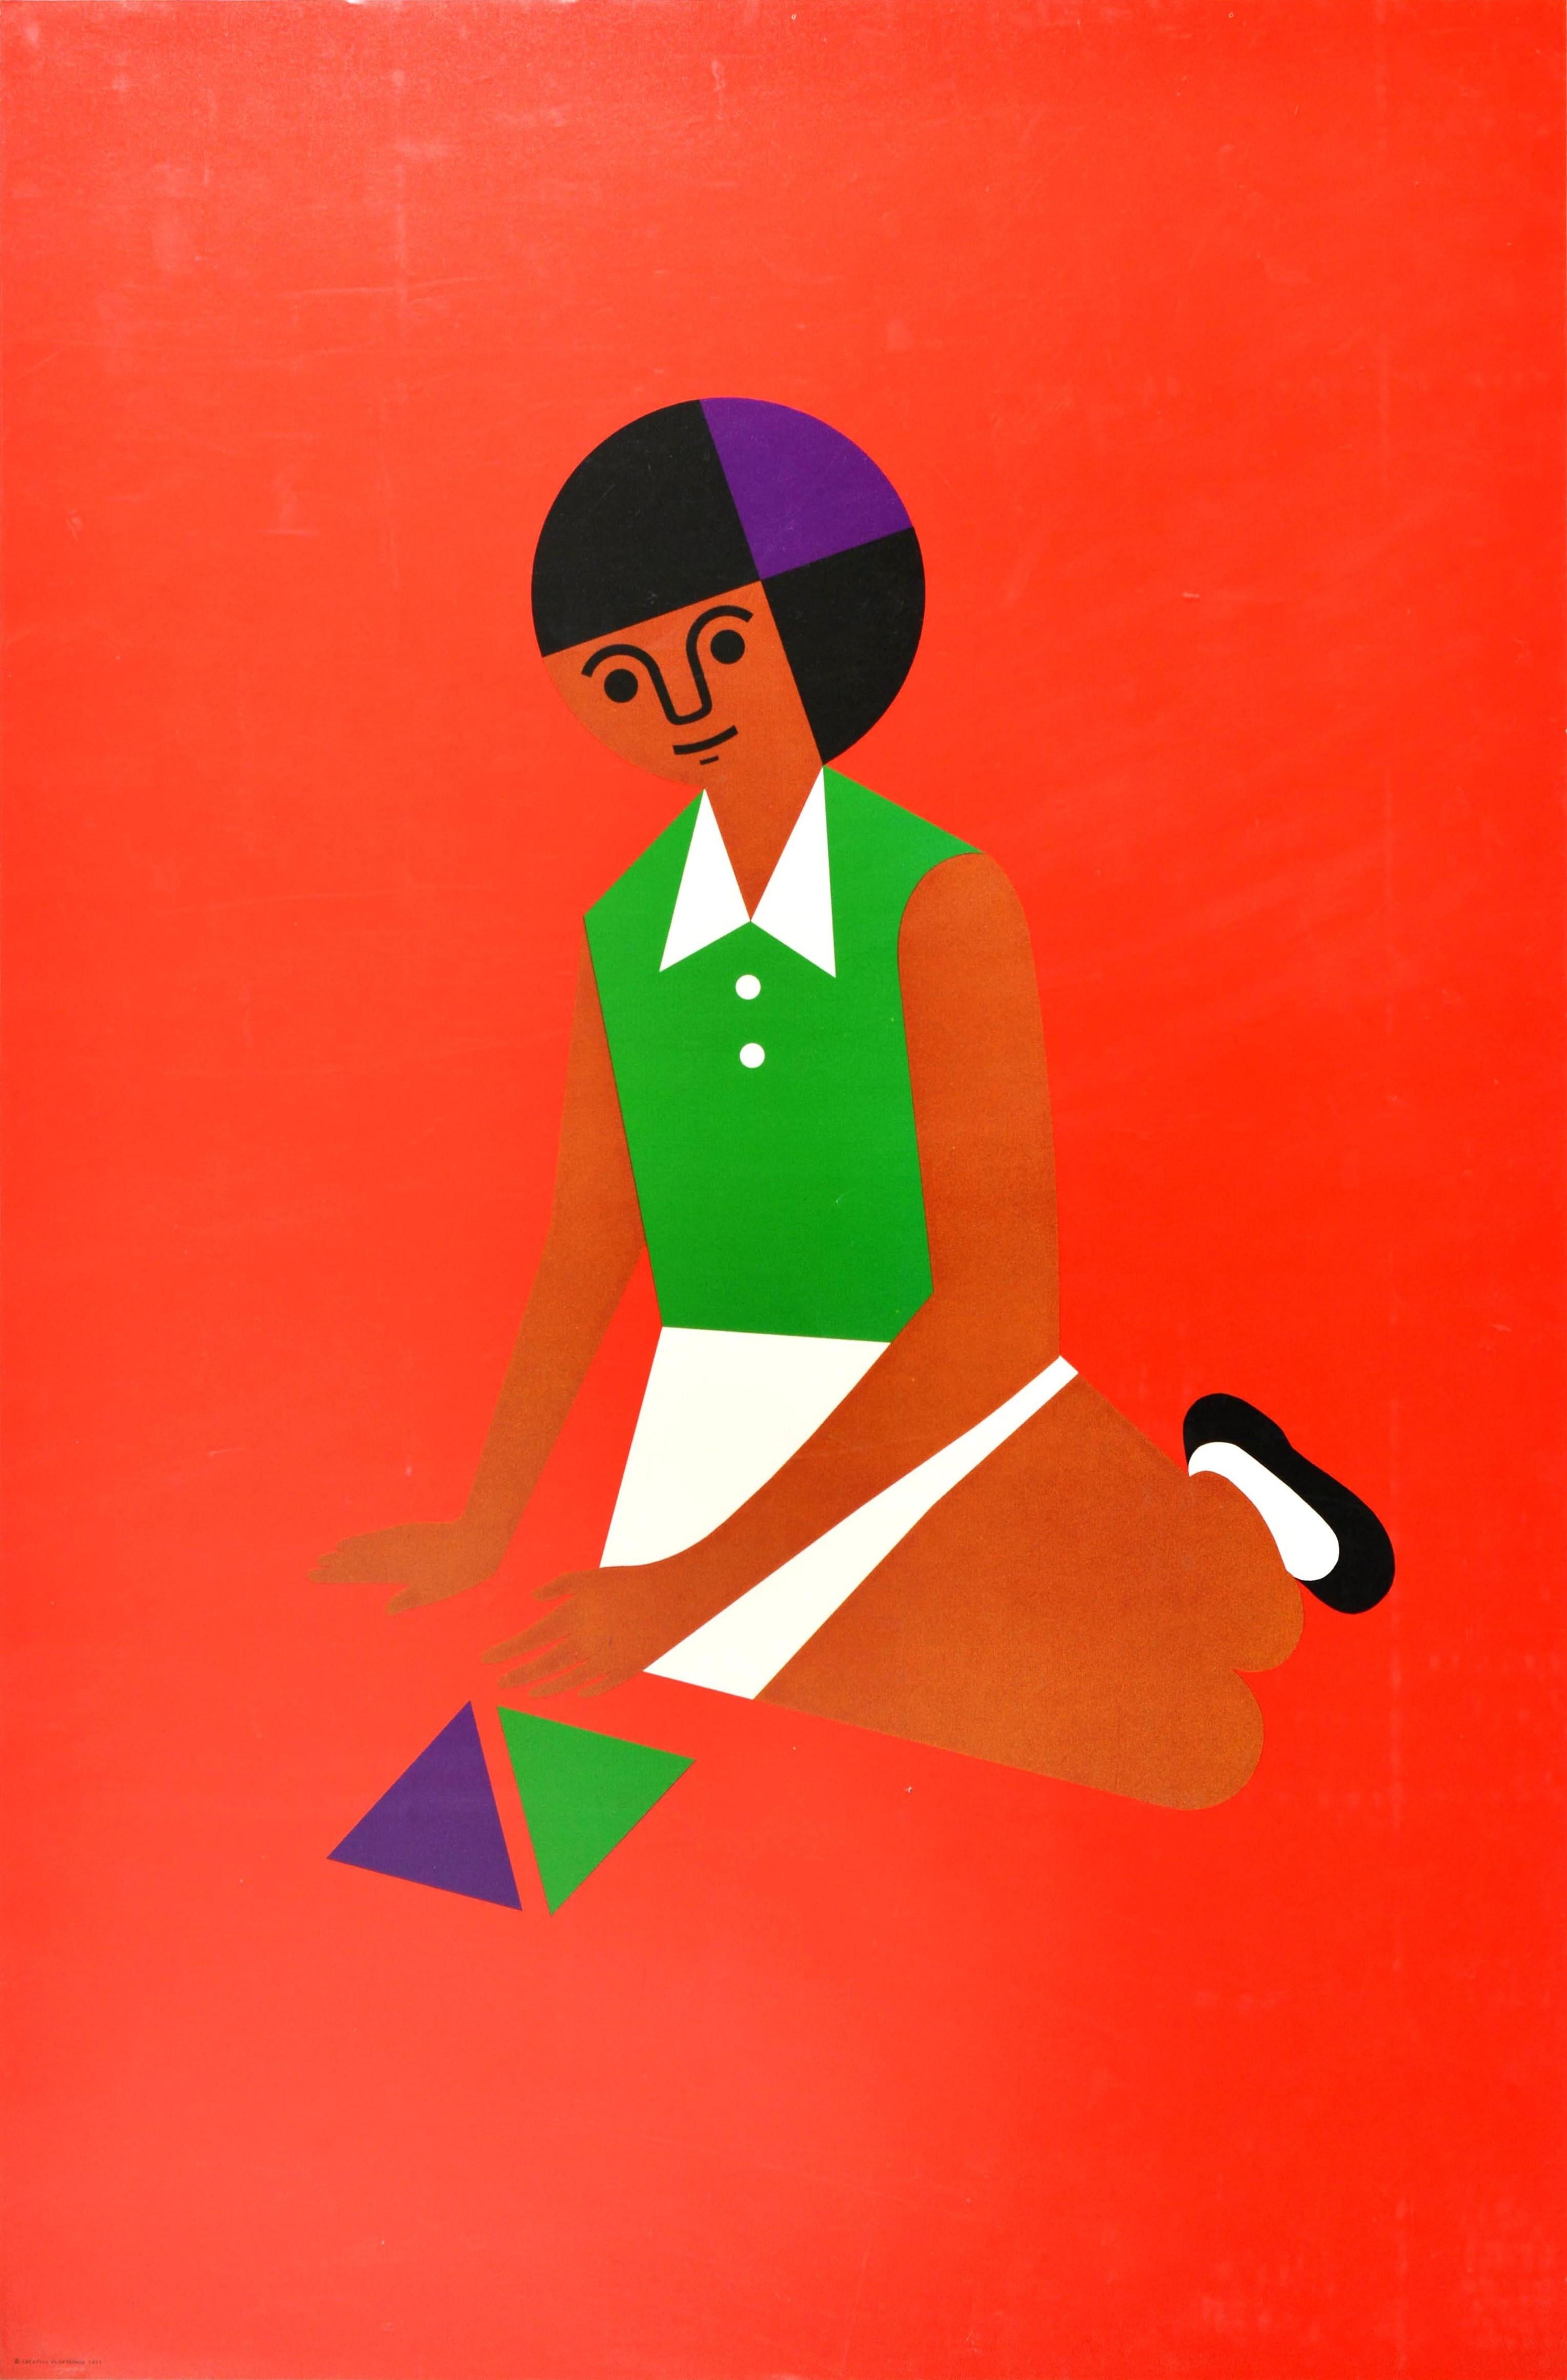 Original vintage advertising poster for the Creative Playthings educational toy shop in Manhattan New York featuring a fun and colourful graphic design by the South African toymaker and illustrator Fredun Shapur (b. 1929), showing a child dressed in